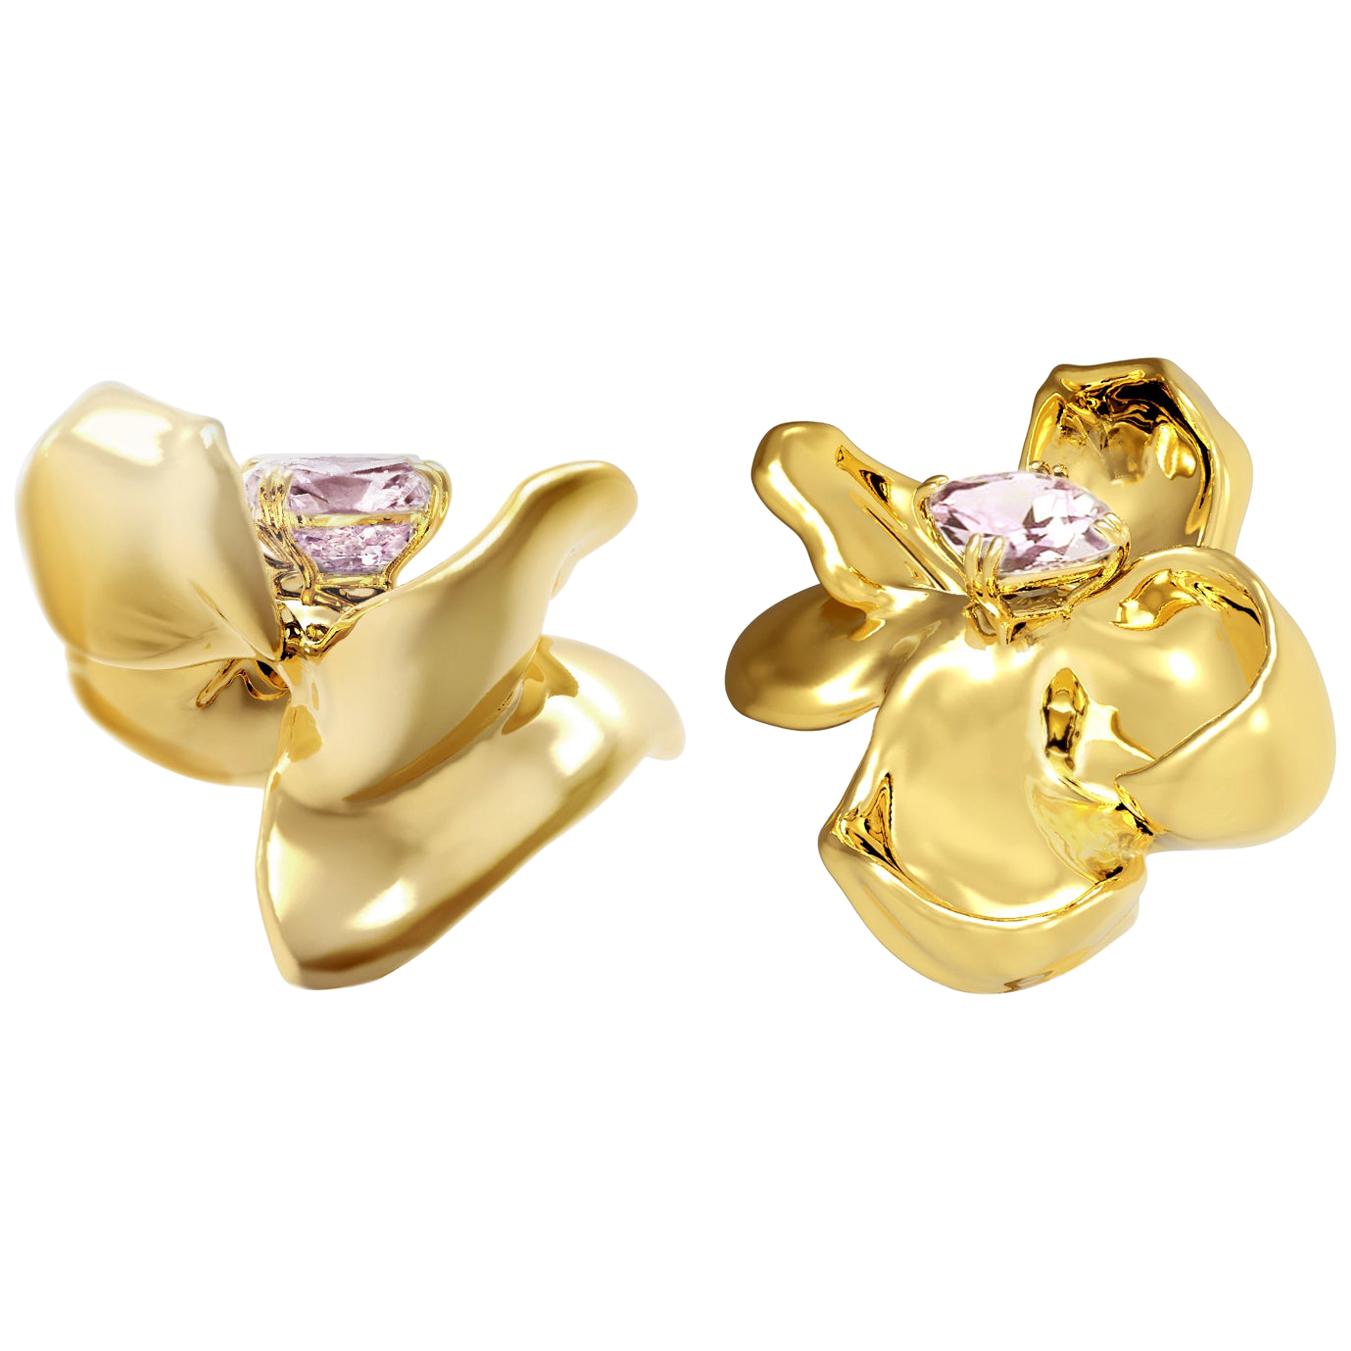 18 Karat Yellow Gold Contemporary Magnolia Clip-On Earrings with Spinels